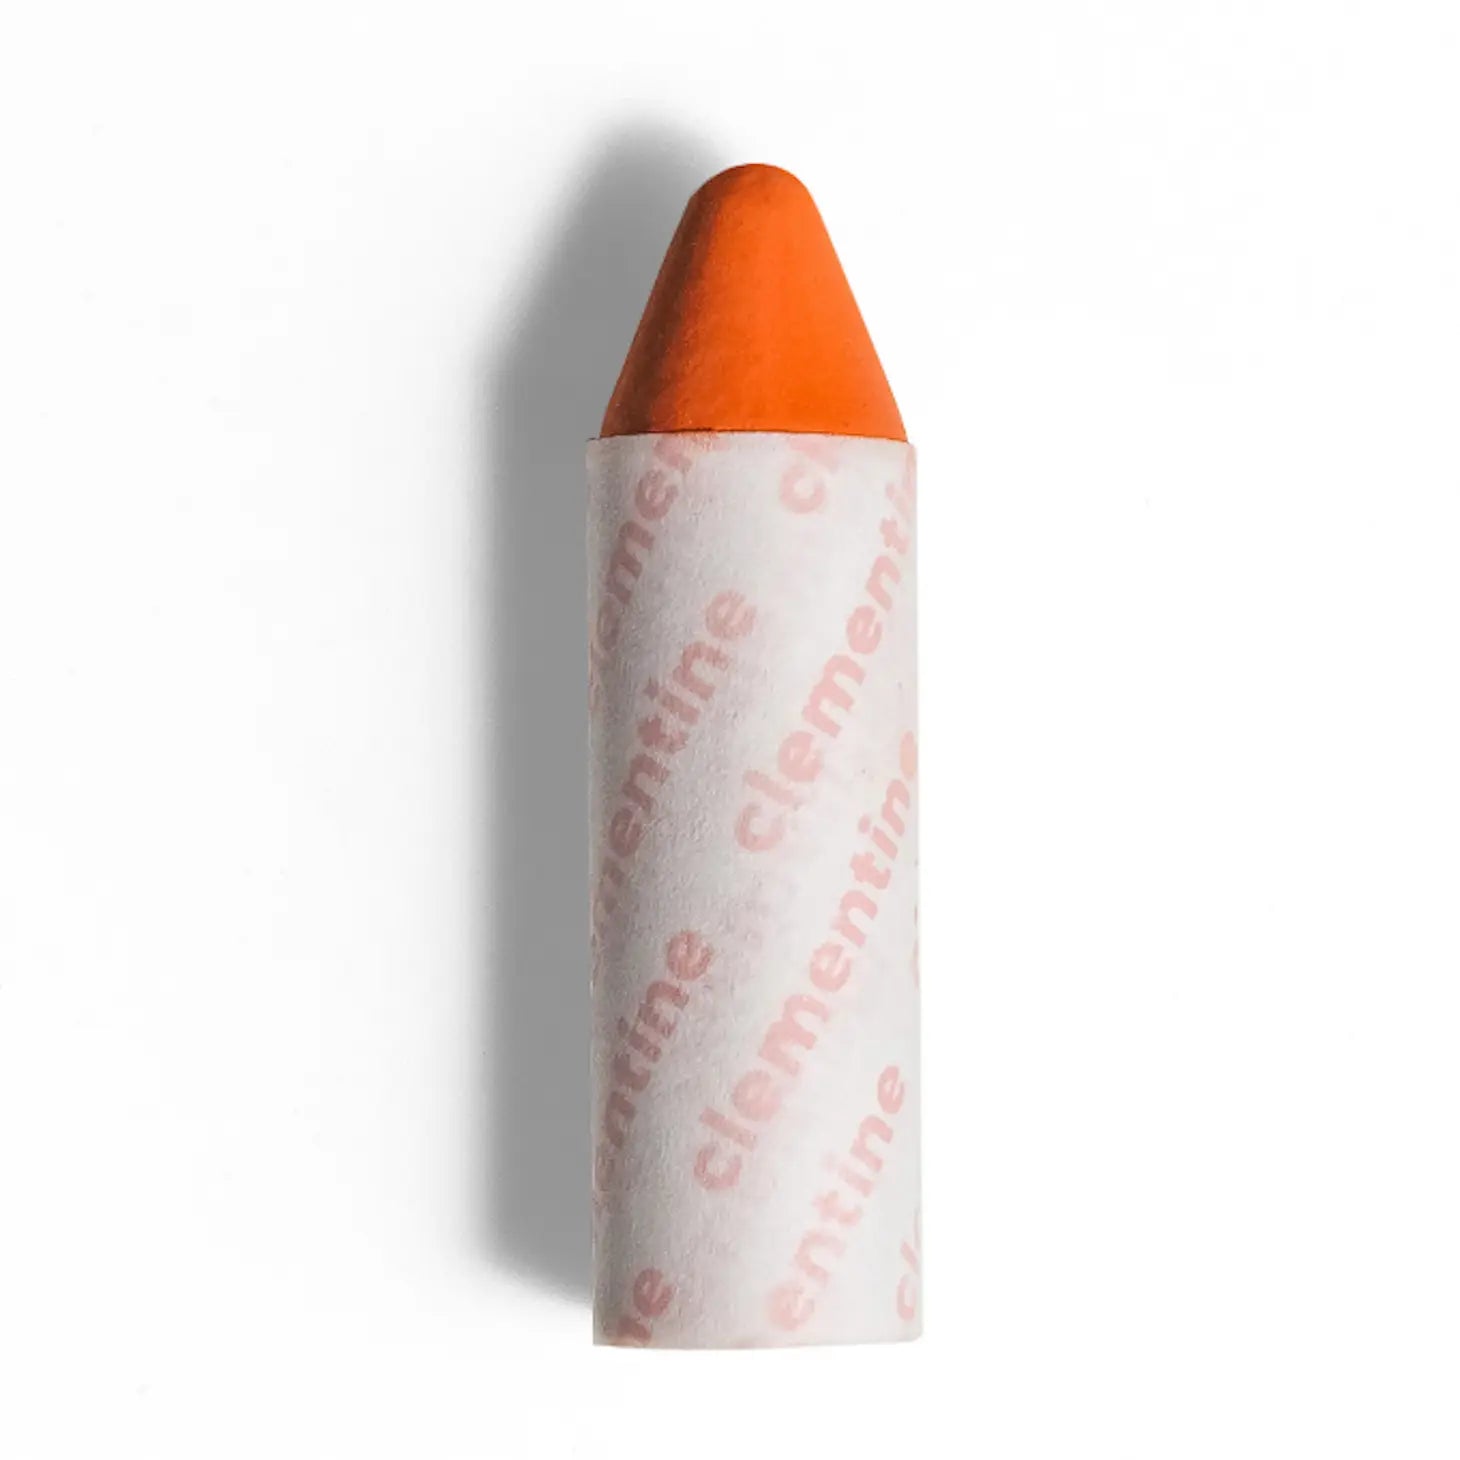 Clementine Lip-To-Lid Balmie